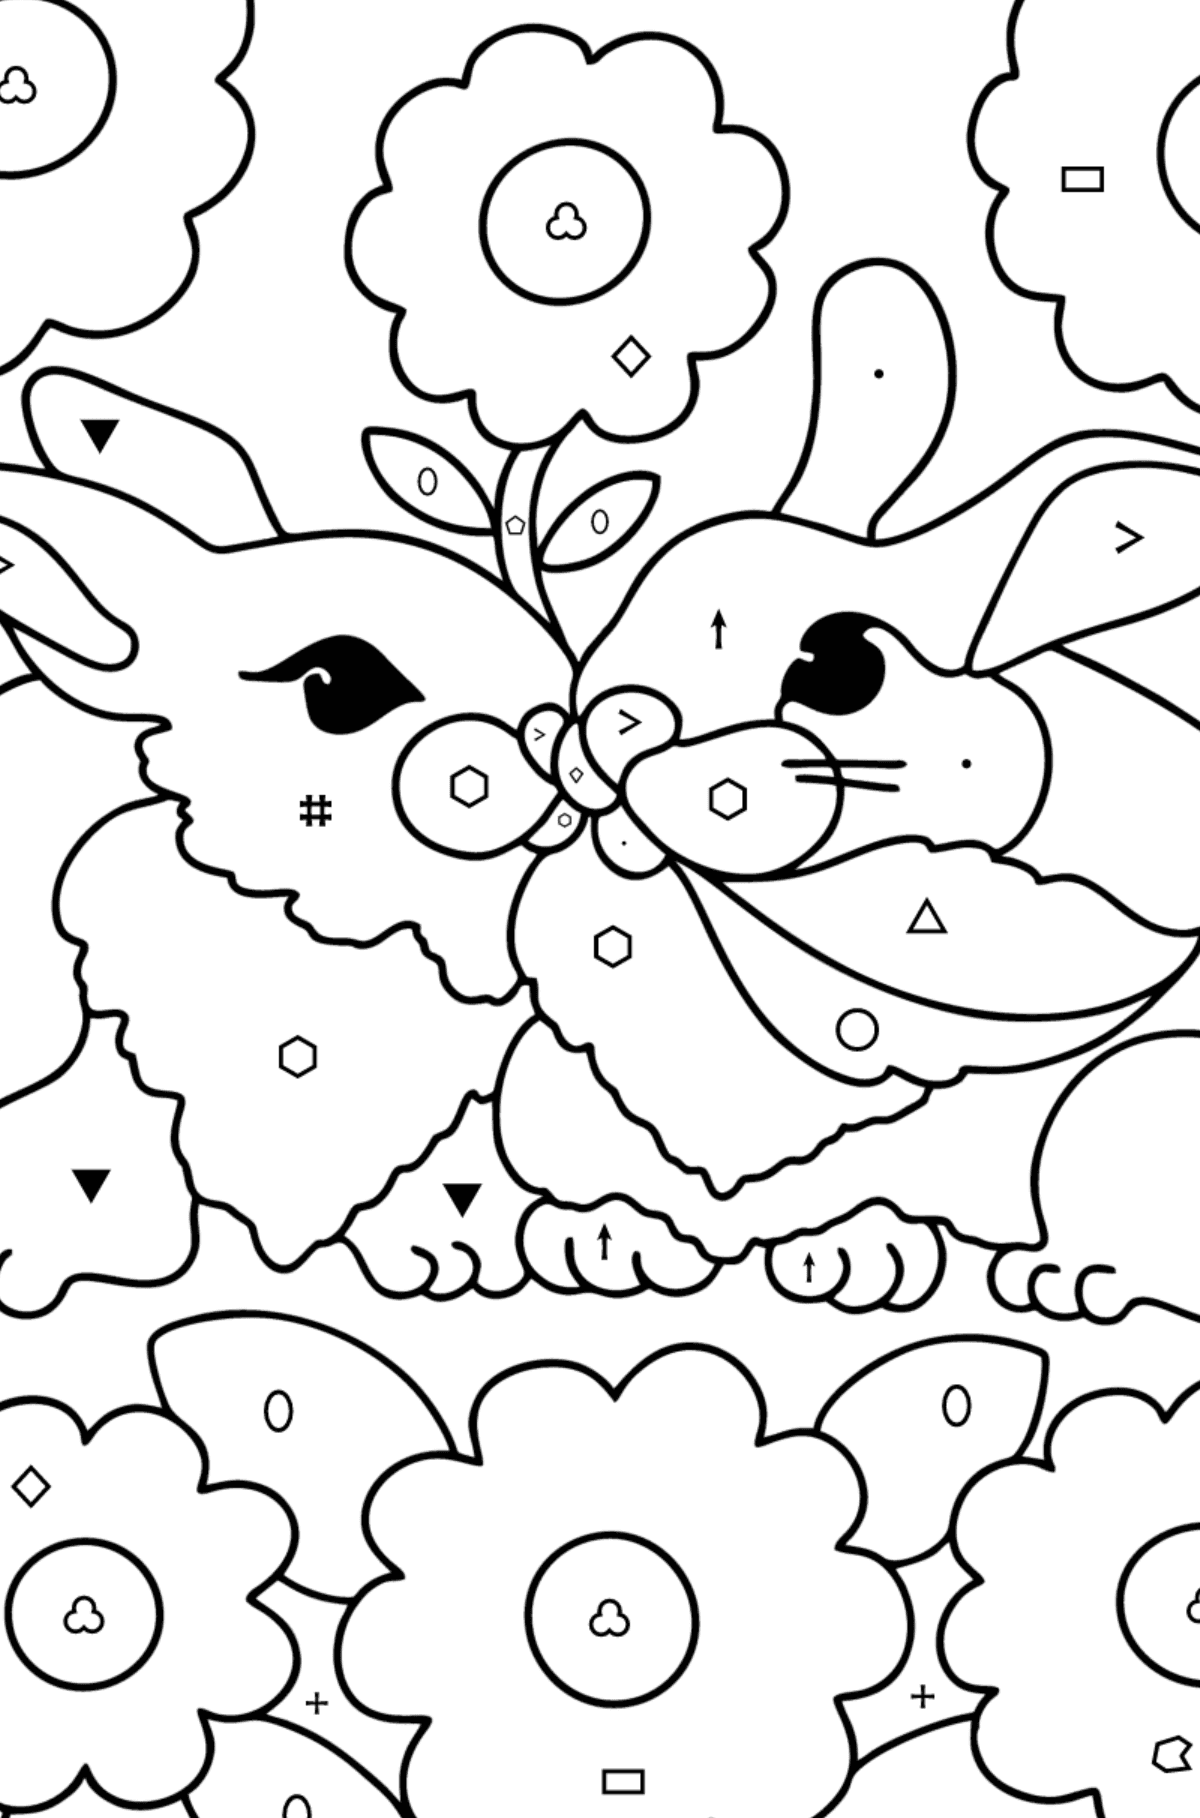 Cute Rabbits Coloring page - Coloring by Symbols and Geometric Shapes for Kids